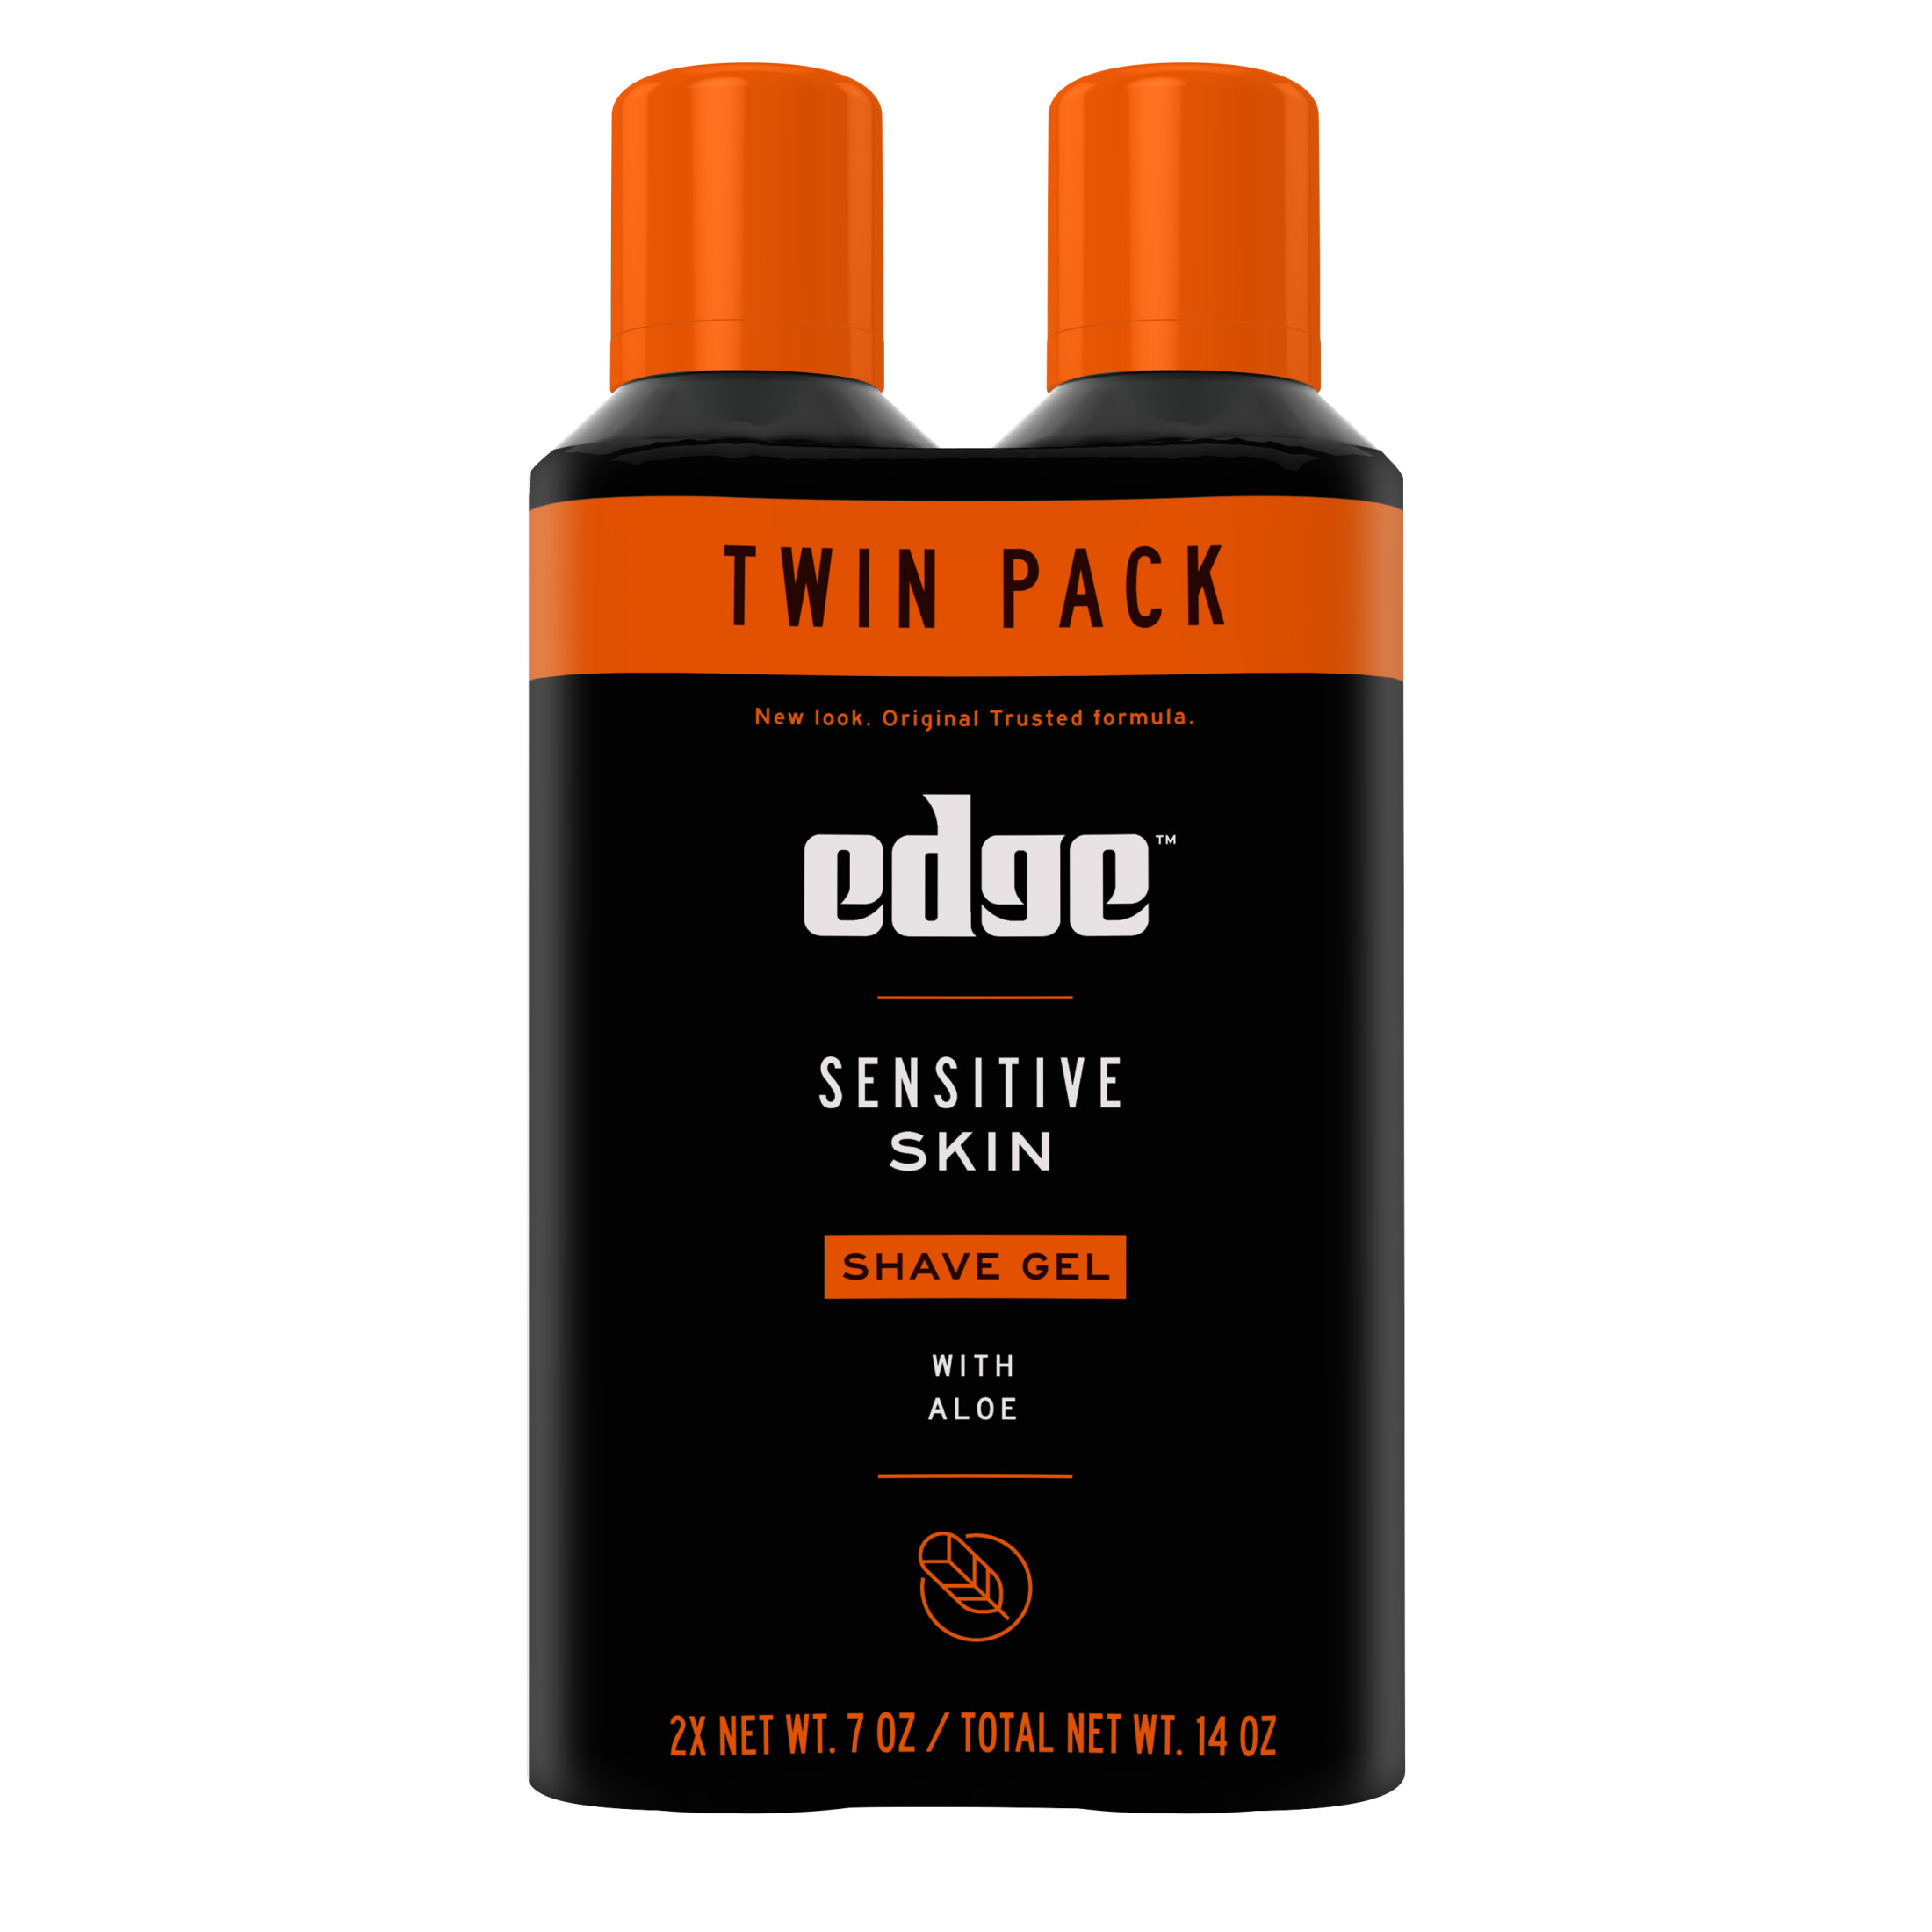 Edge Sensitive Skin Shave Gel for Men with Aloe, Twin Pack, 14 oz - image 2 of 10